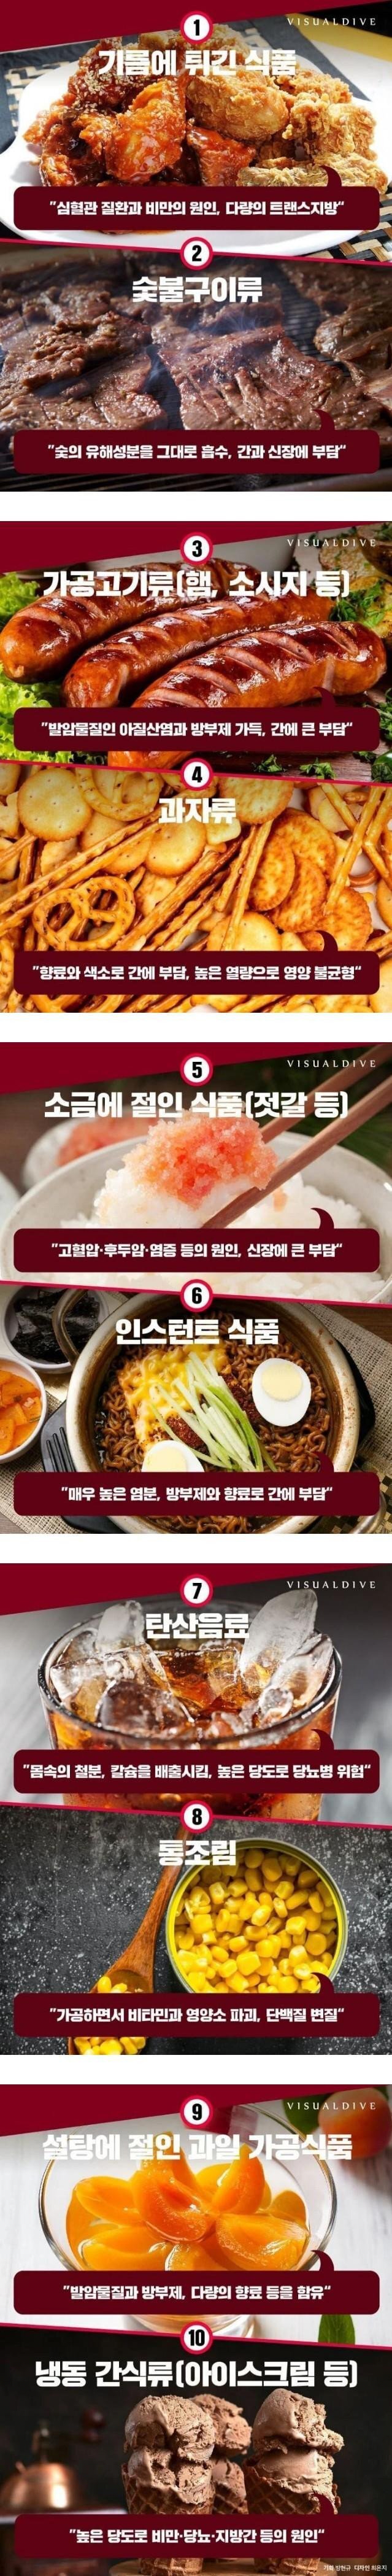 WHO 선정 세계 10대 불량 식품 The Top 10 Worst Foods You Should Give Up